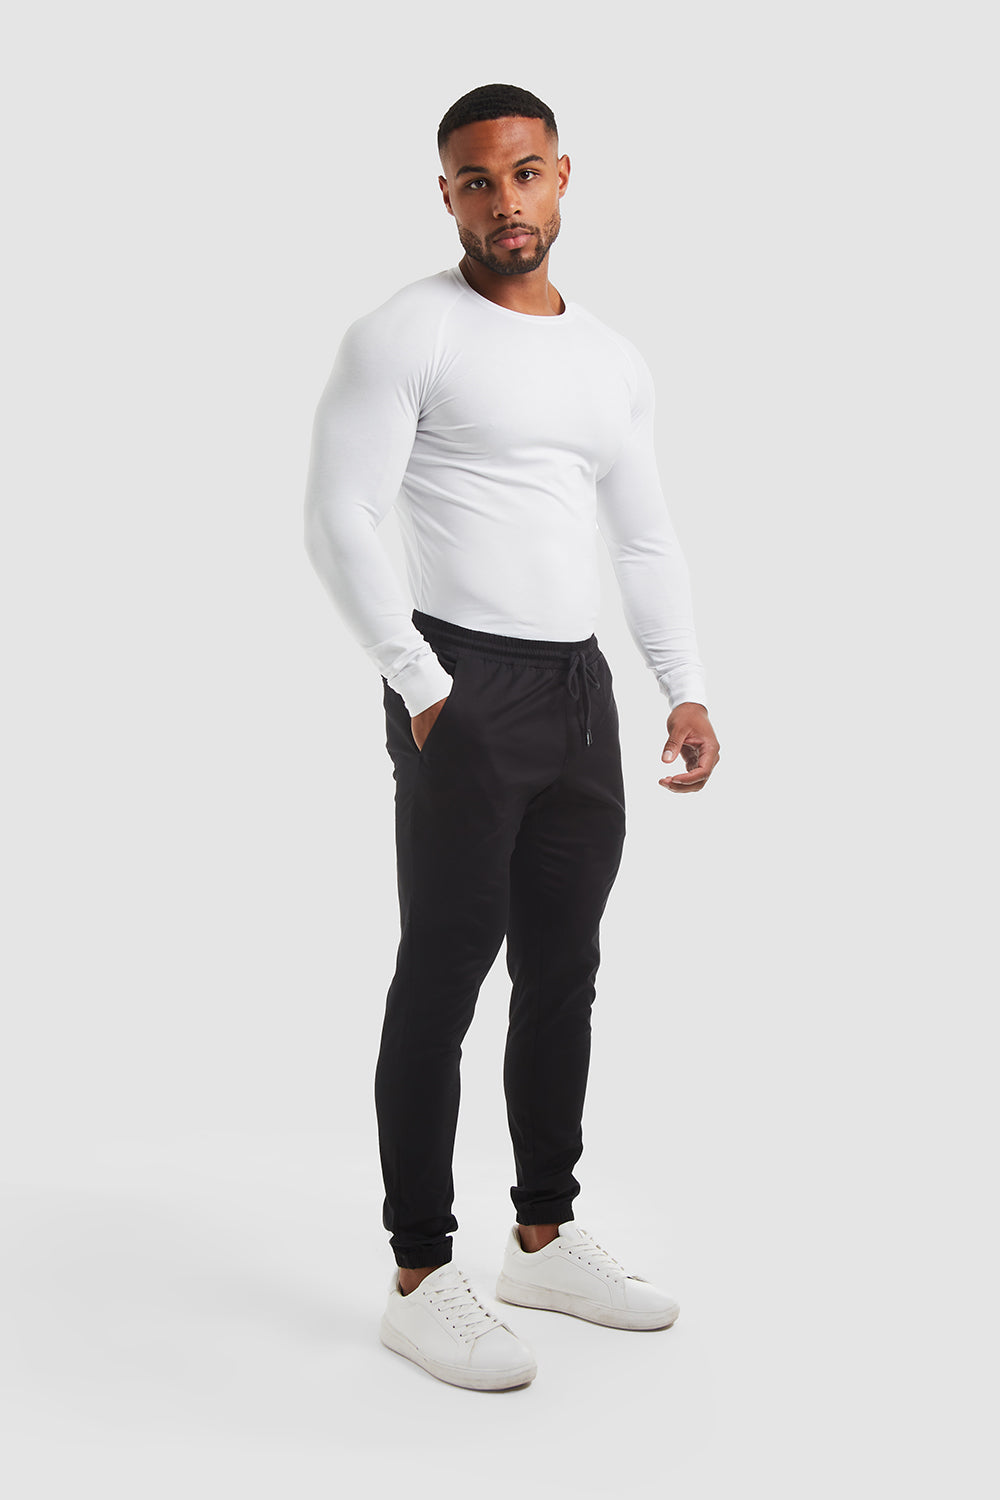 Cuffed Trousers in Black - TAILORED ATHLETE - ROW